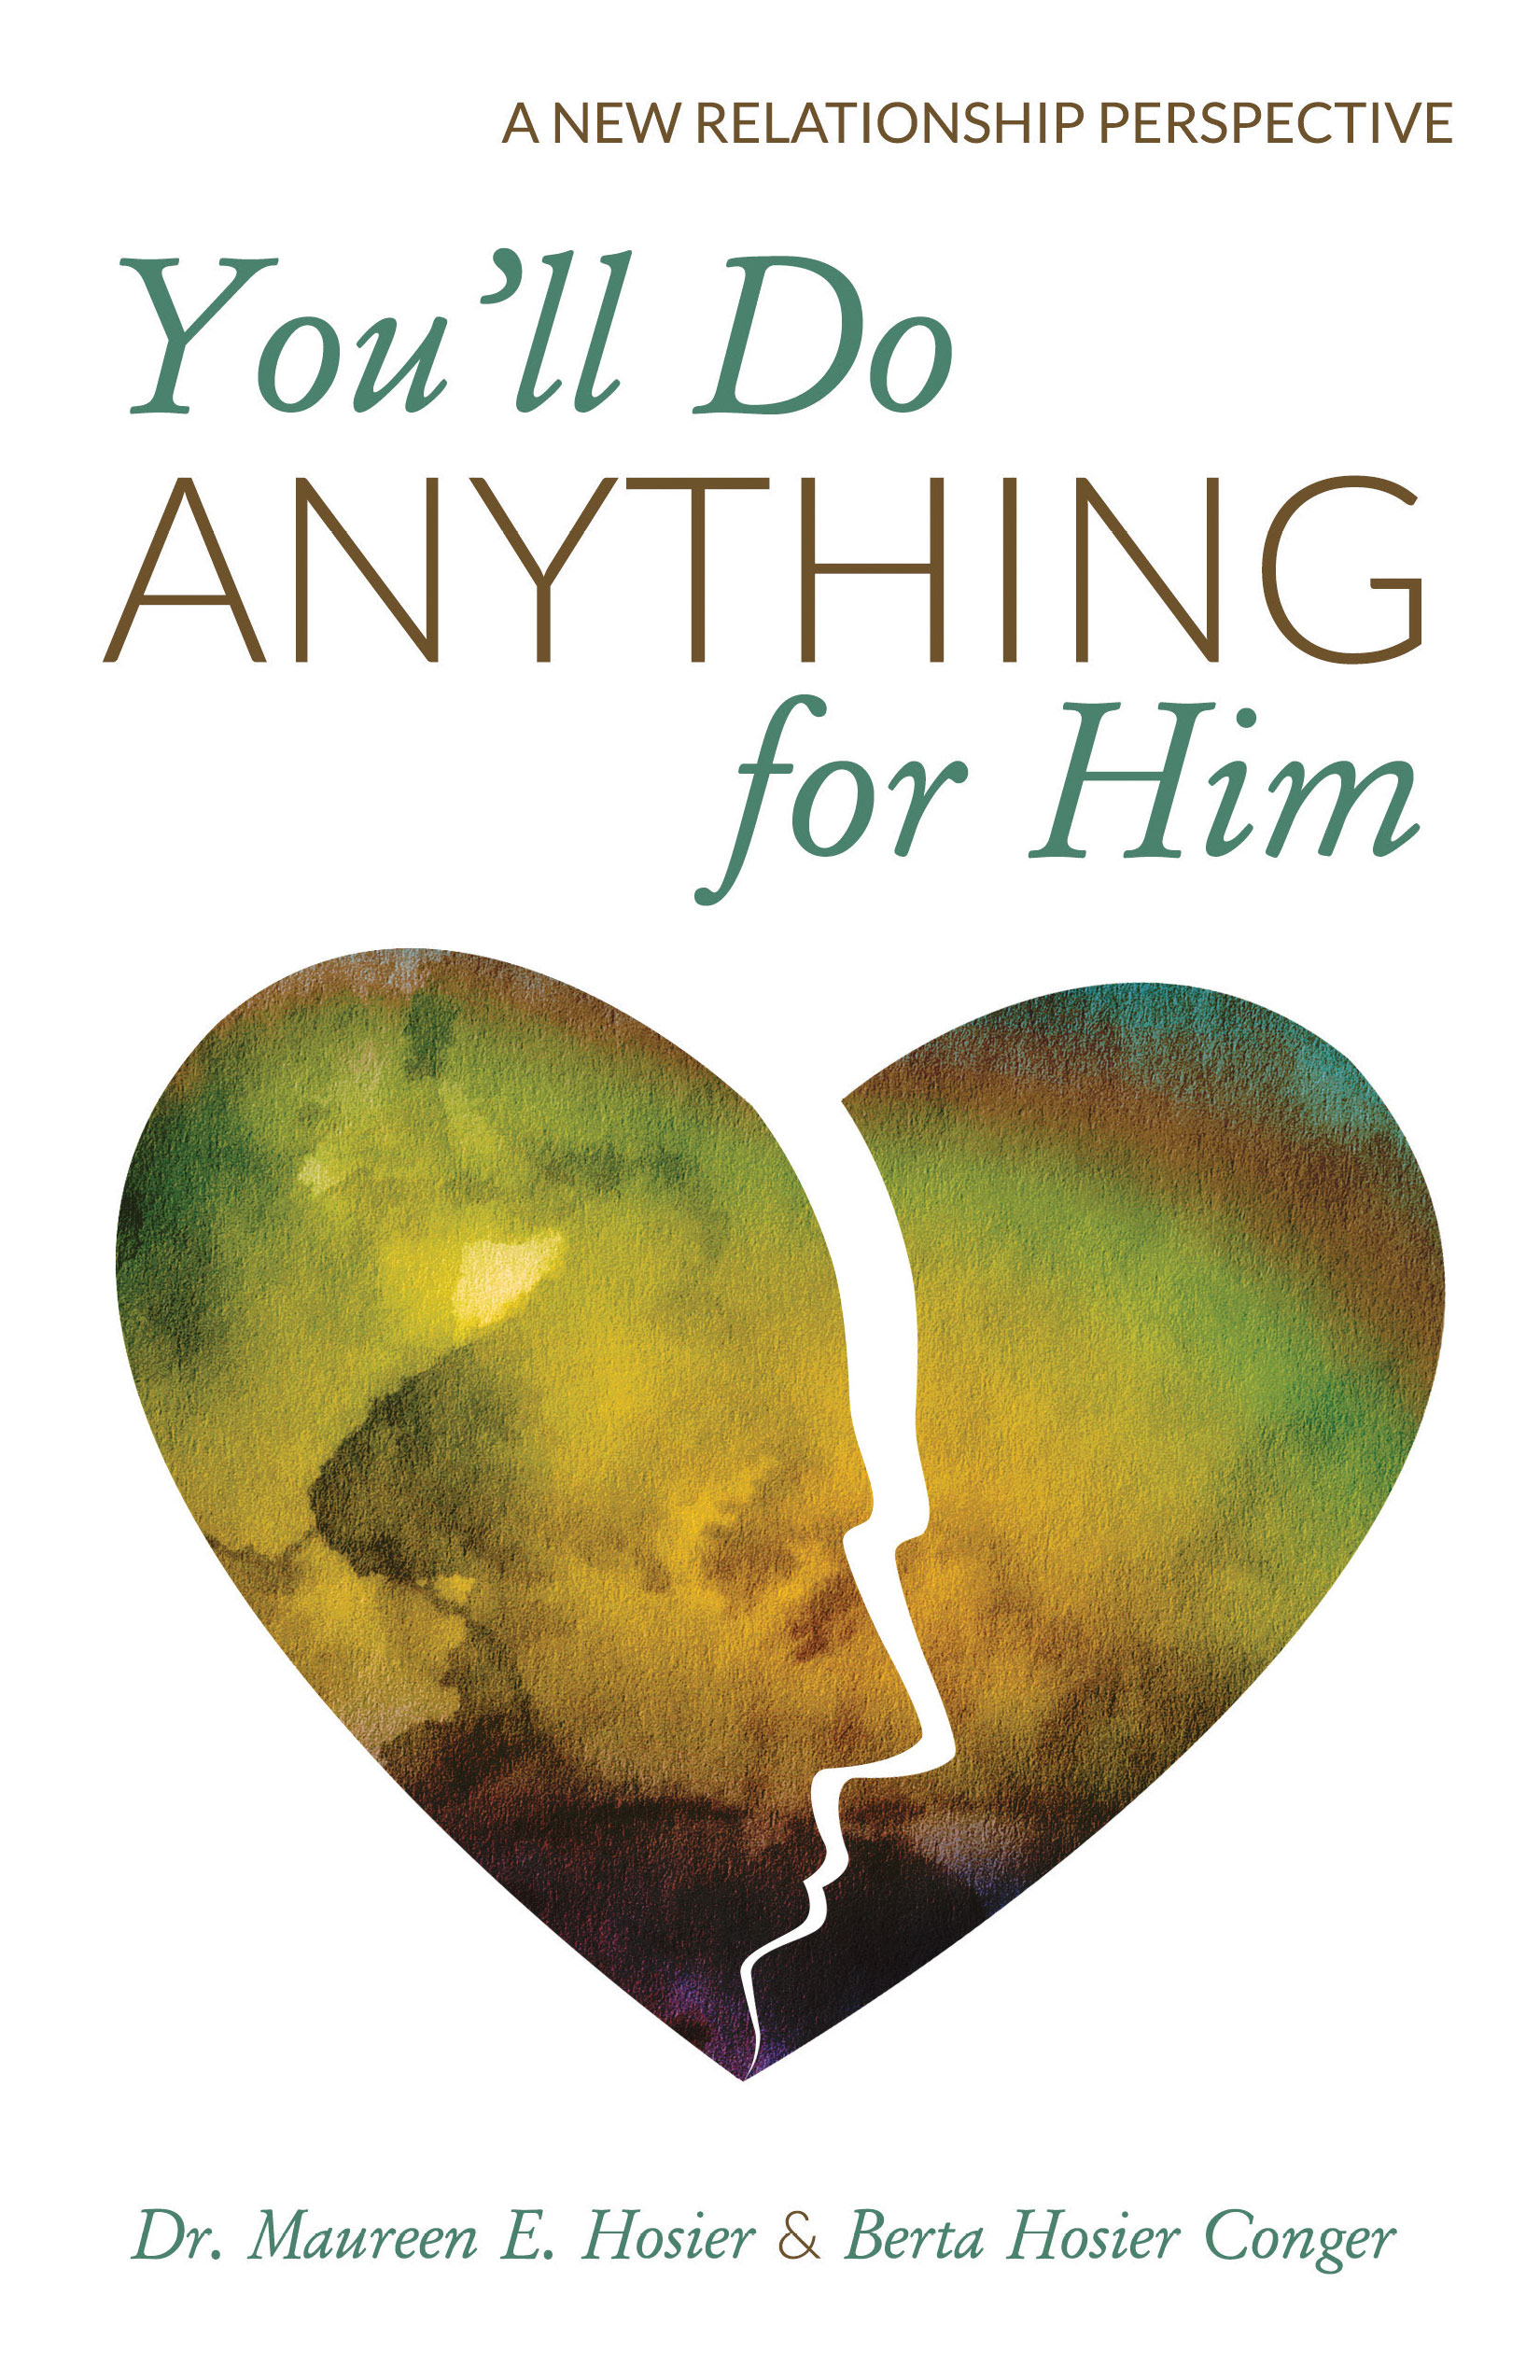 You'll Do Anything for Him: A New Relationship Perspective